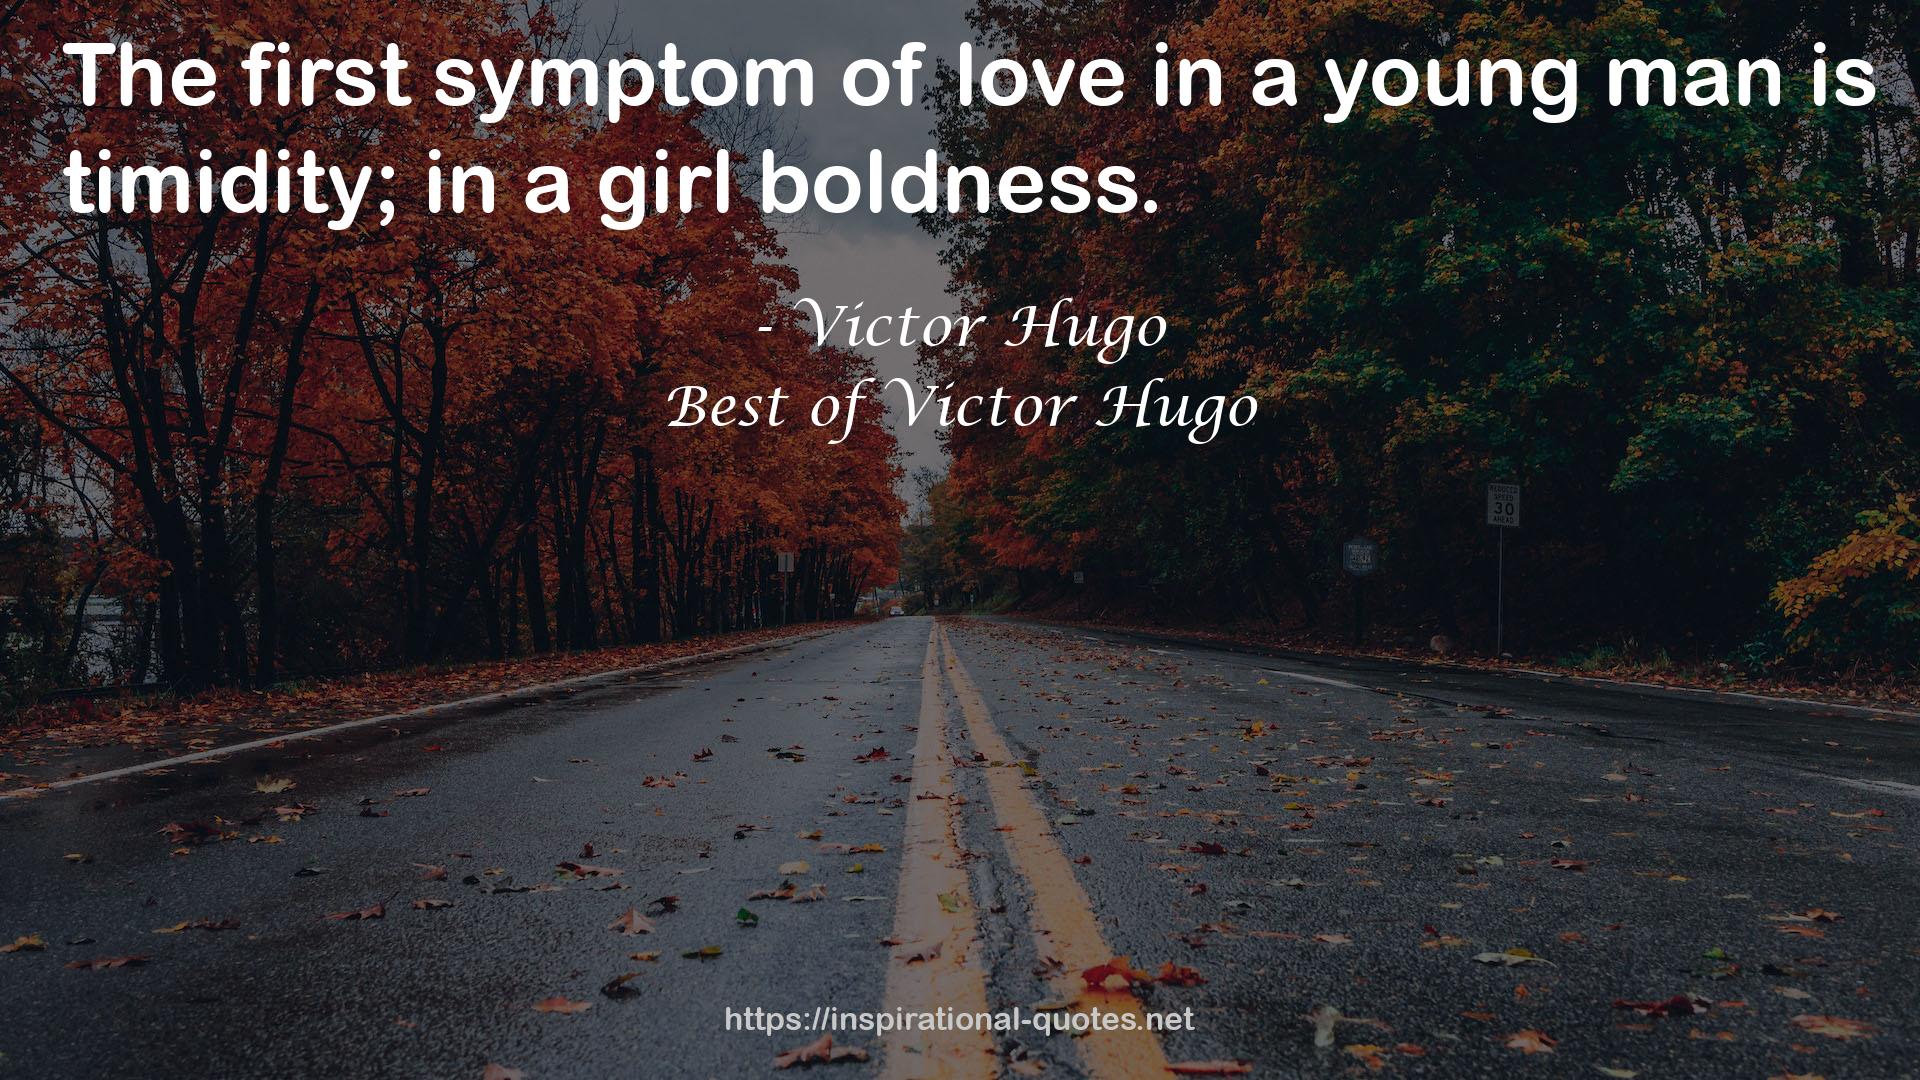 Best of Victor Hugo QUOTES